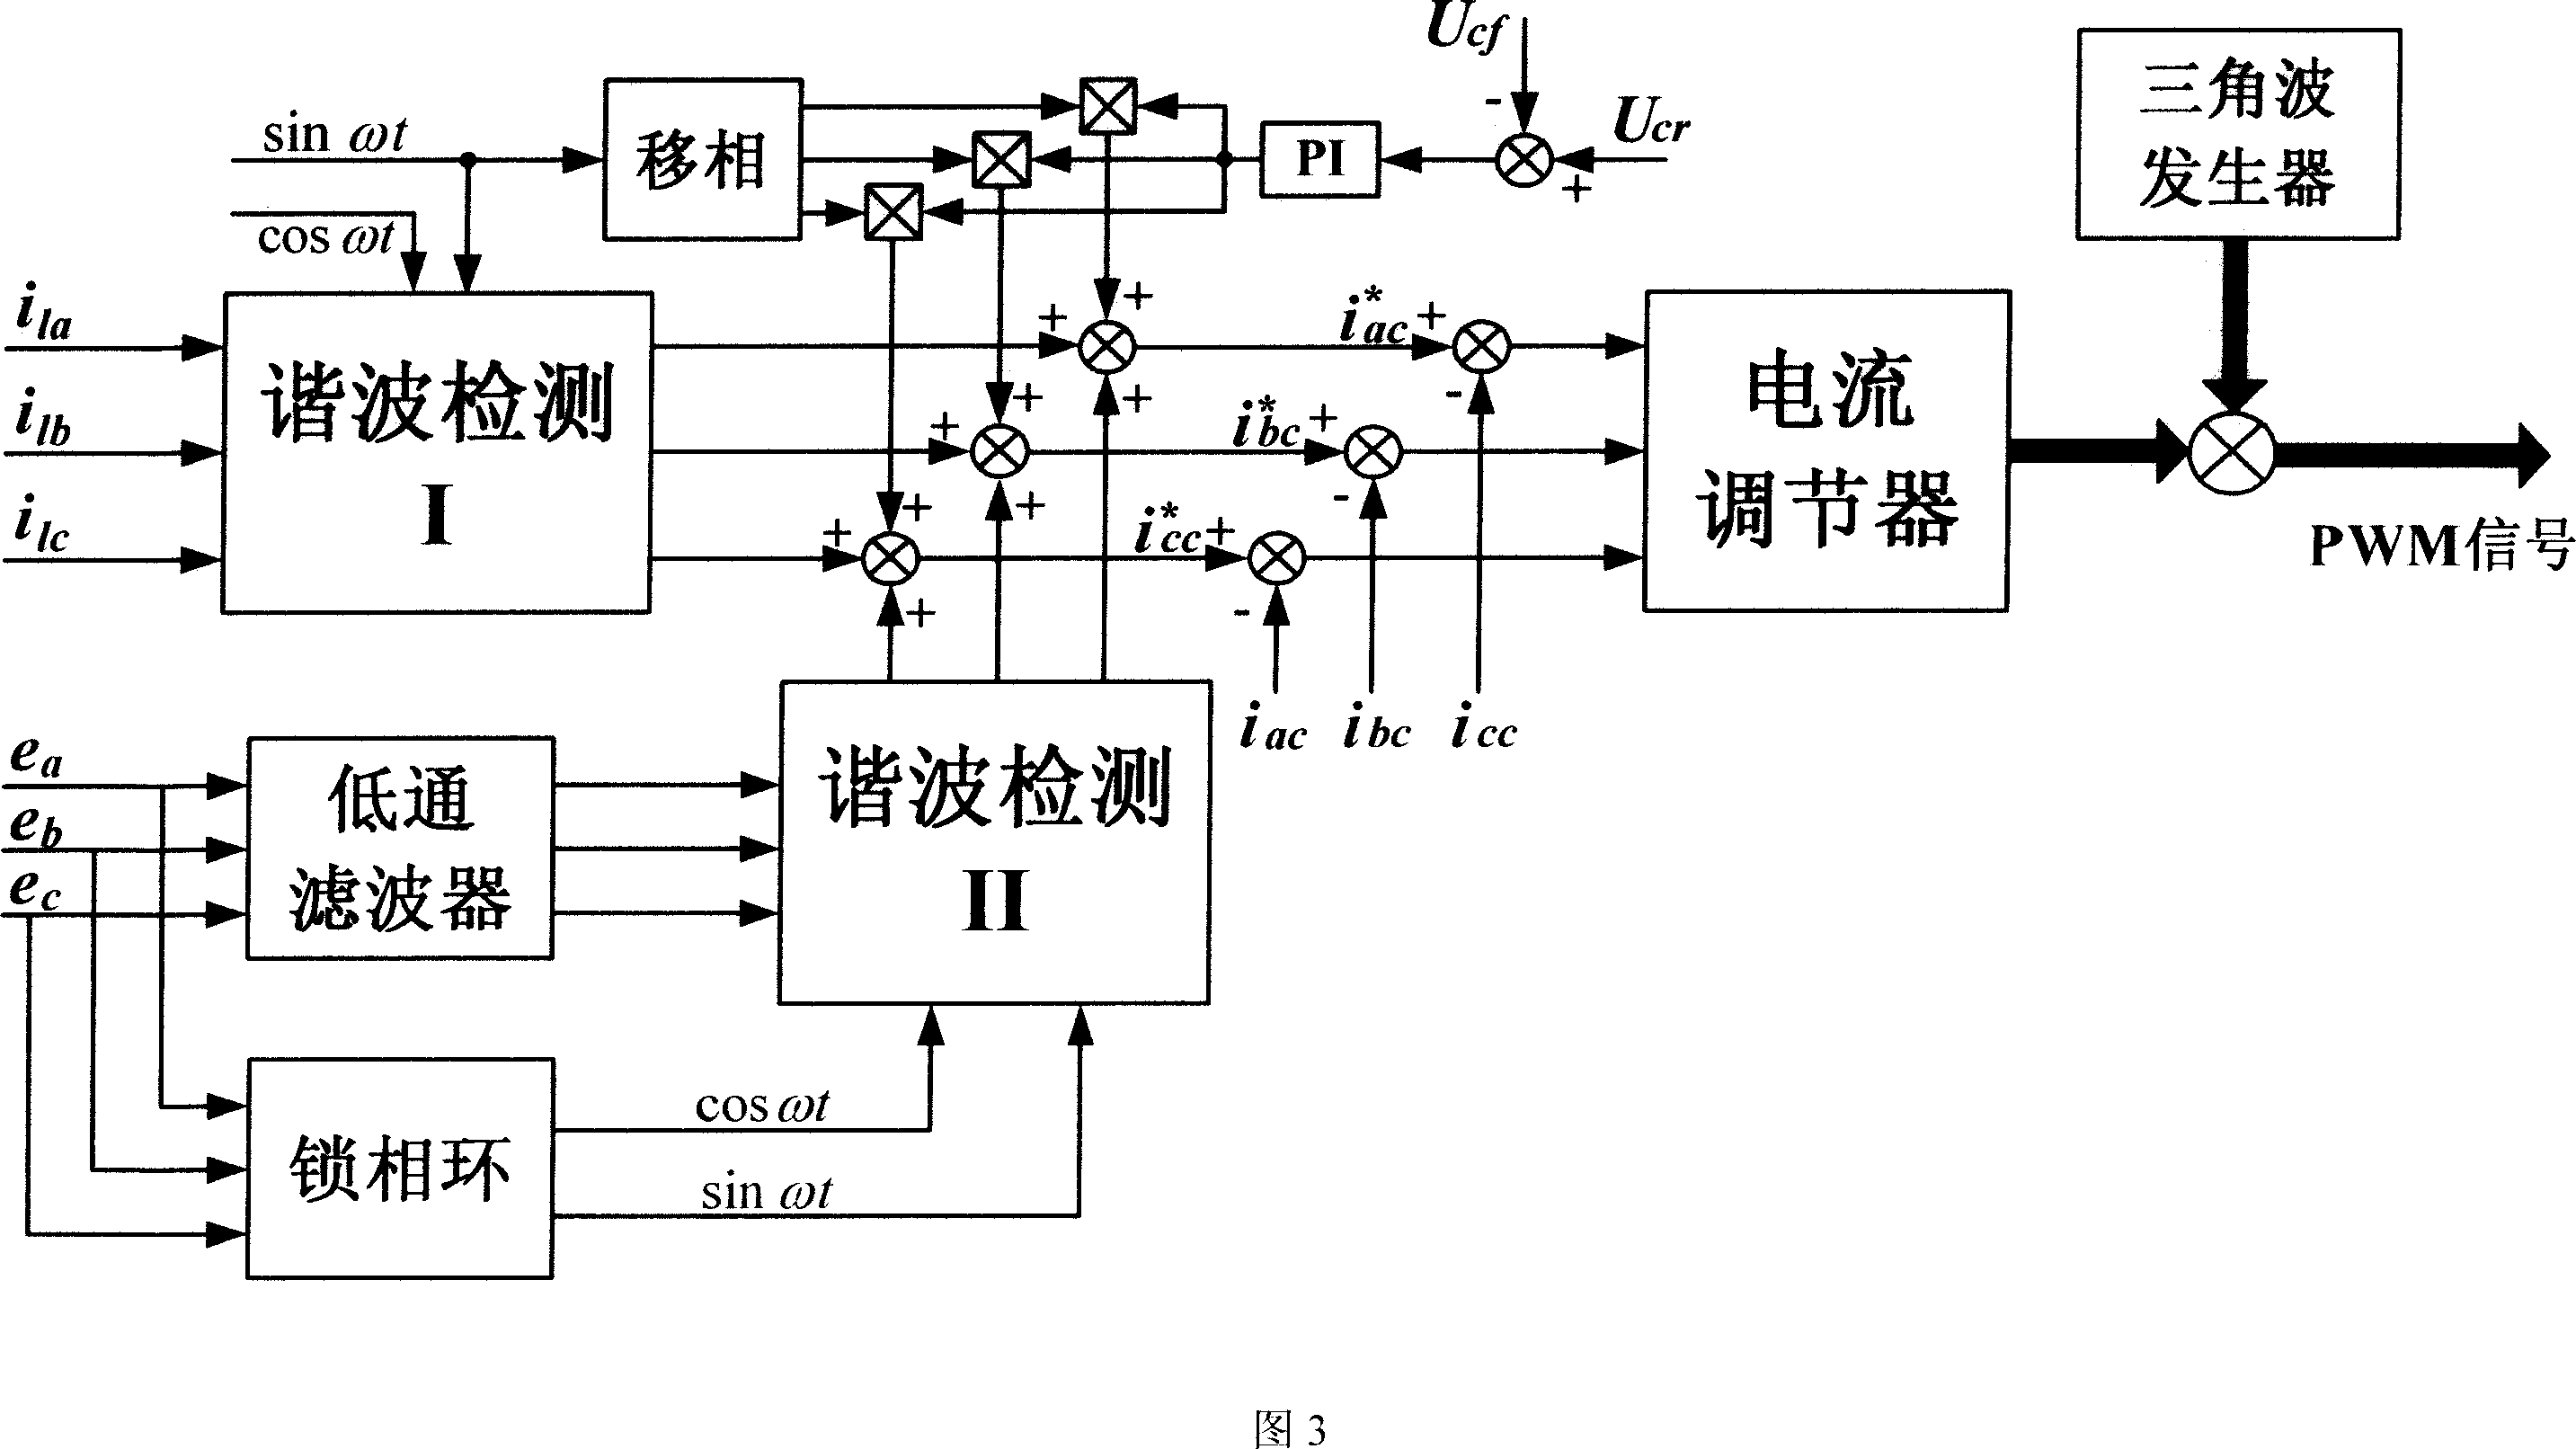 Control method for the mixing compensation system of the active power filter and parallel capacitor